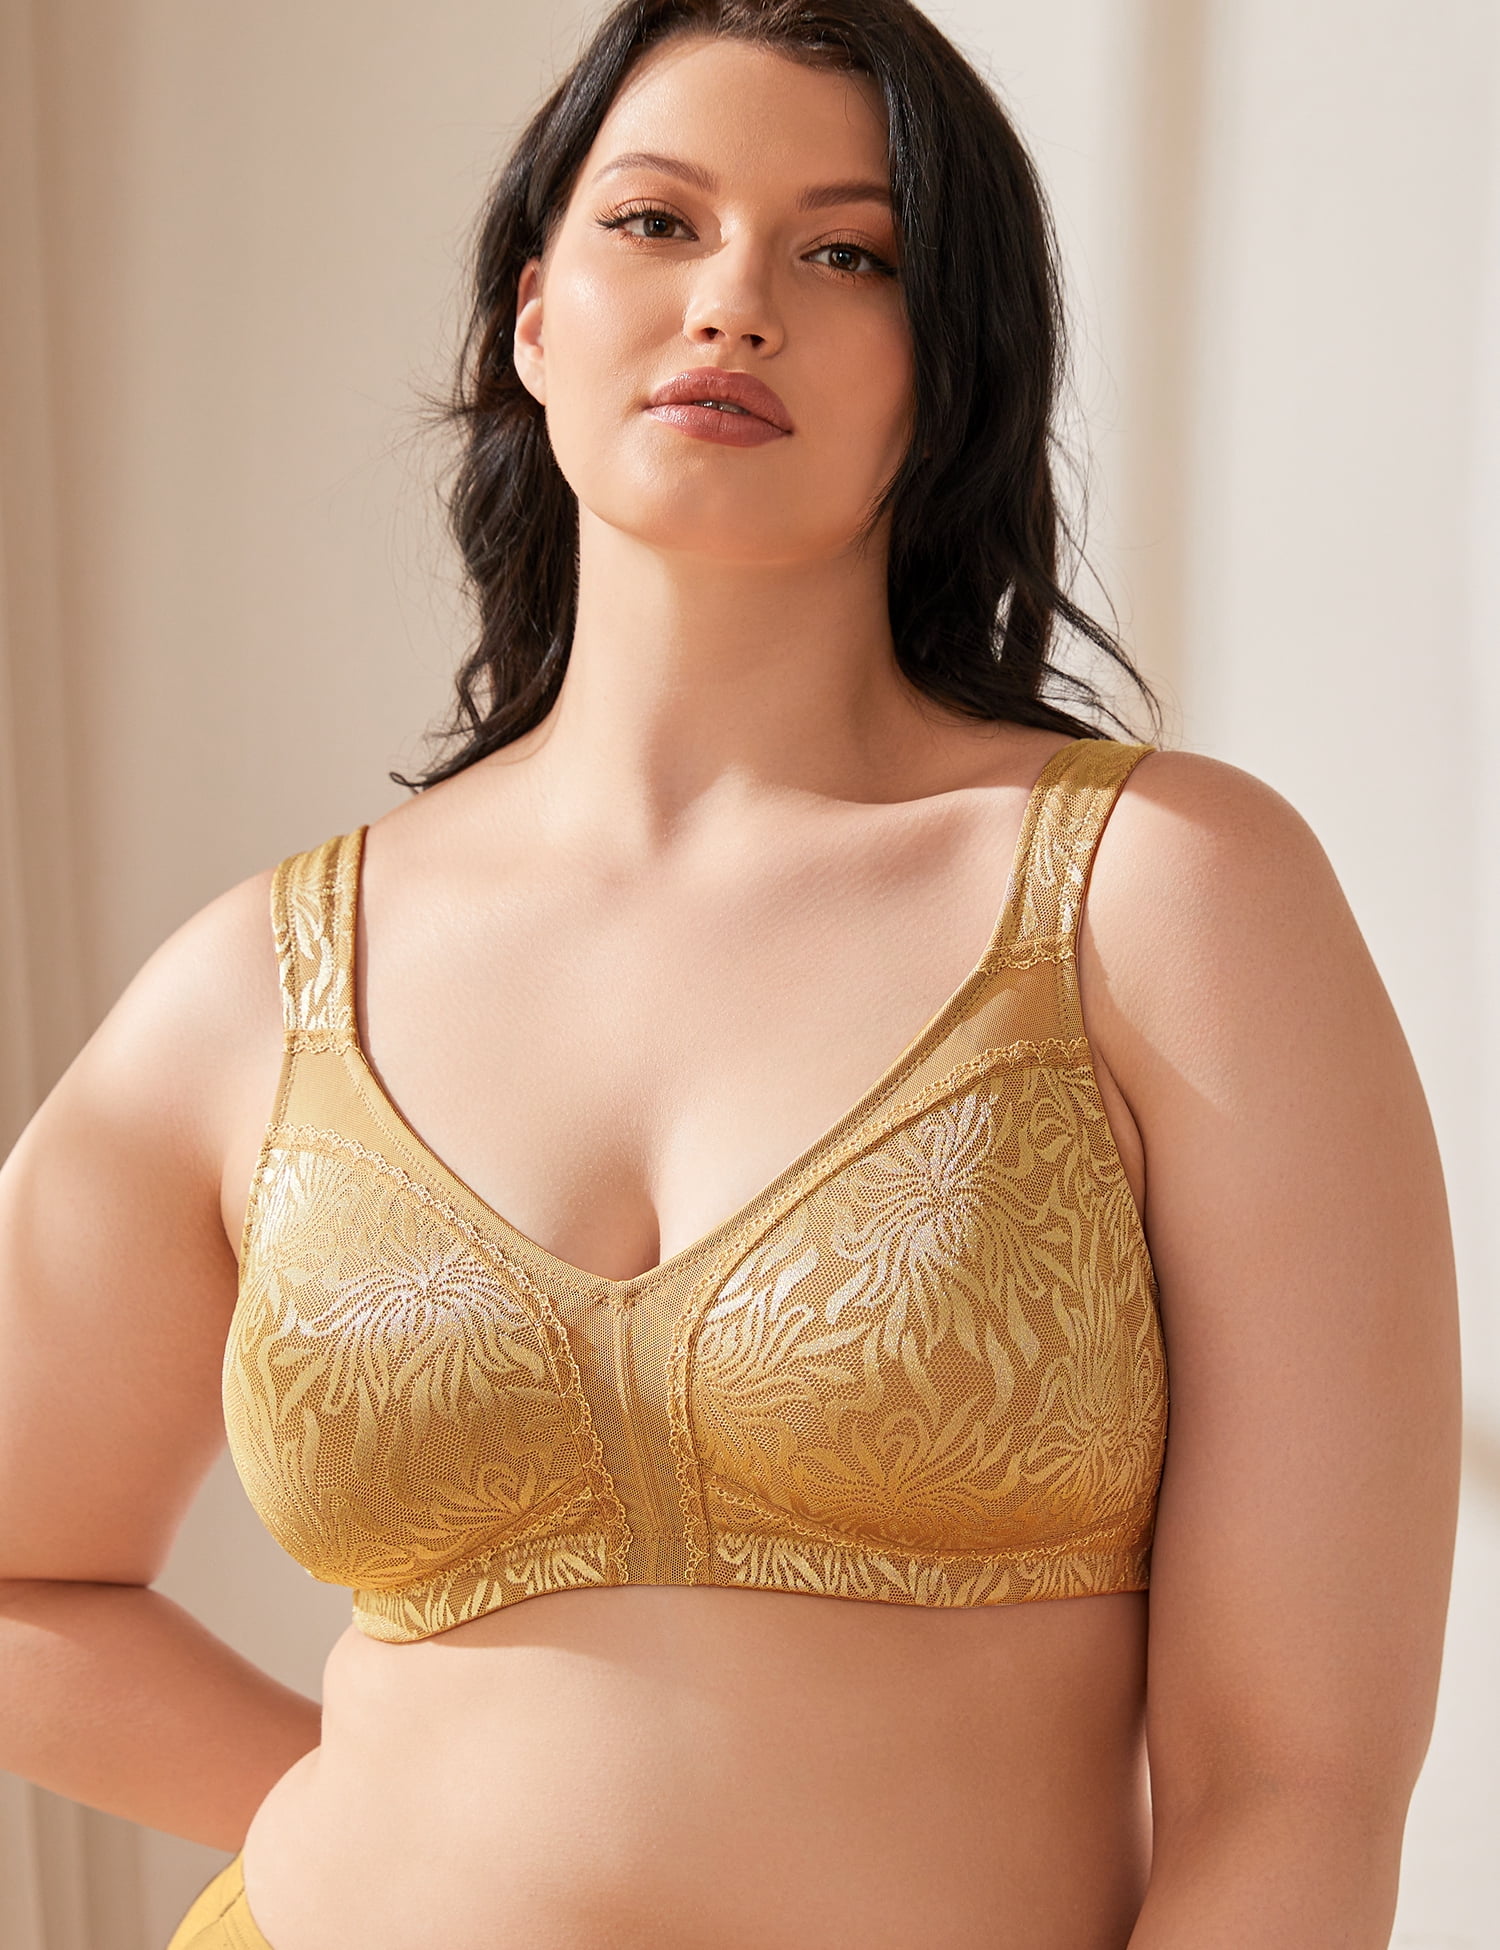 Plus Size Women's Full Cup Minimizer Bras Non-Padded Wirefree